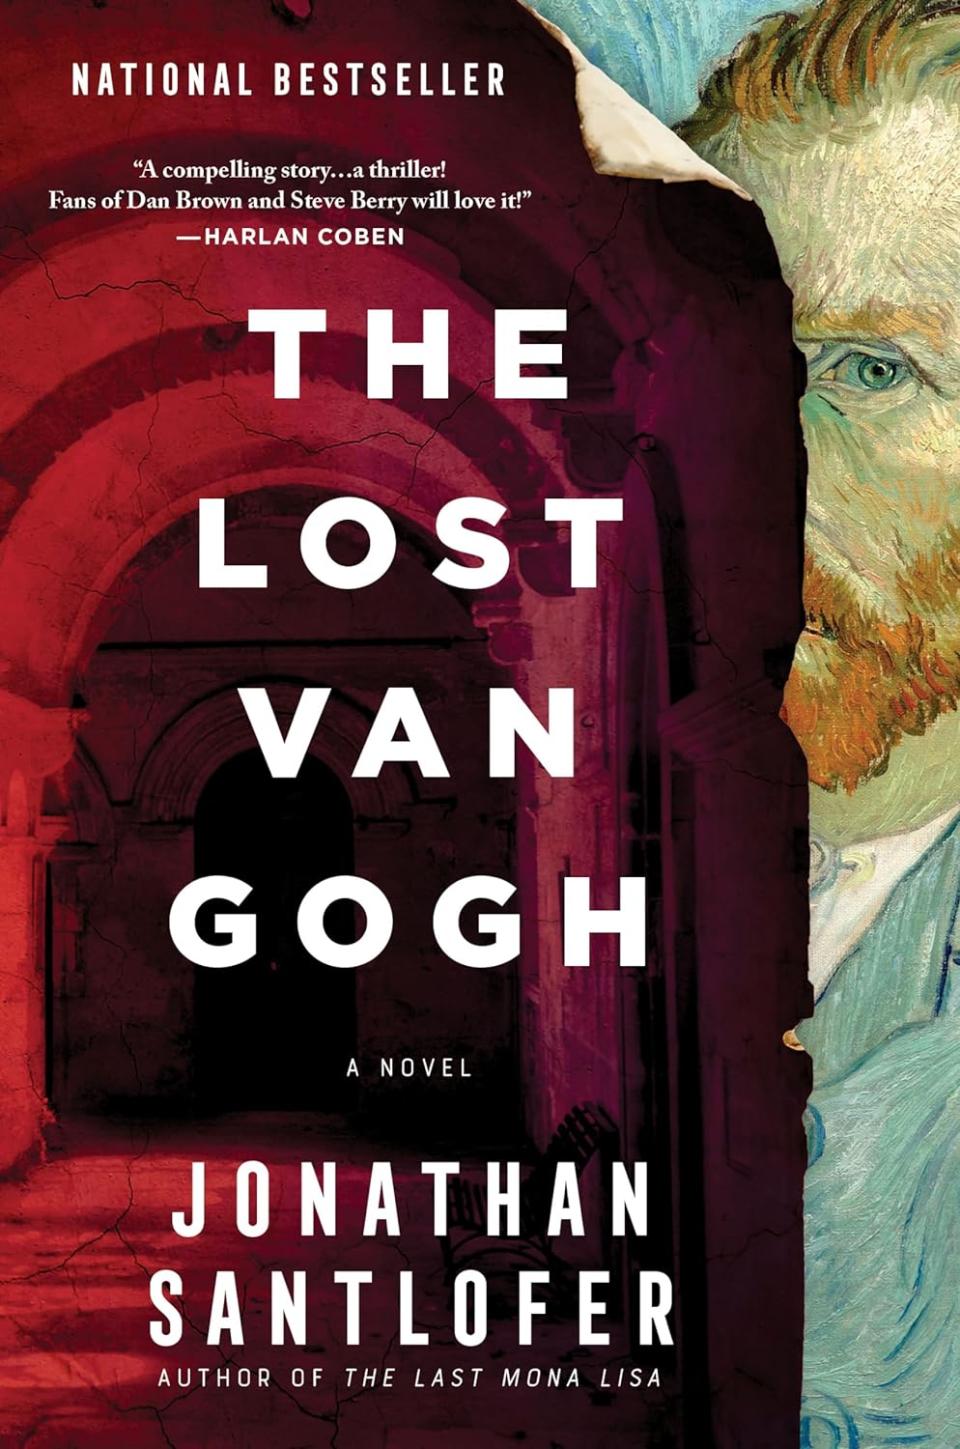 The Lost Van Gogh by Jonathan Santlofer (Fathers day books) 